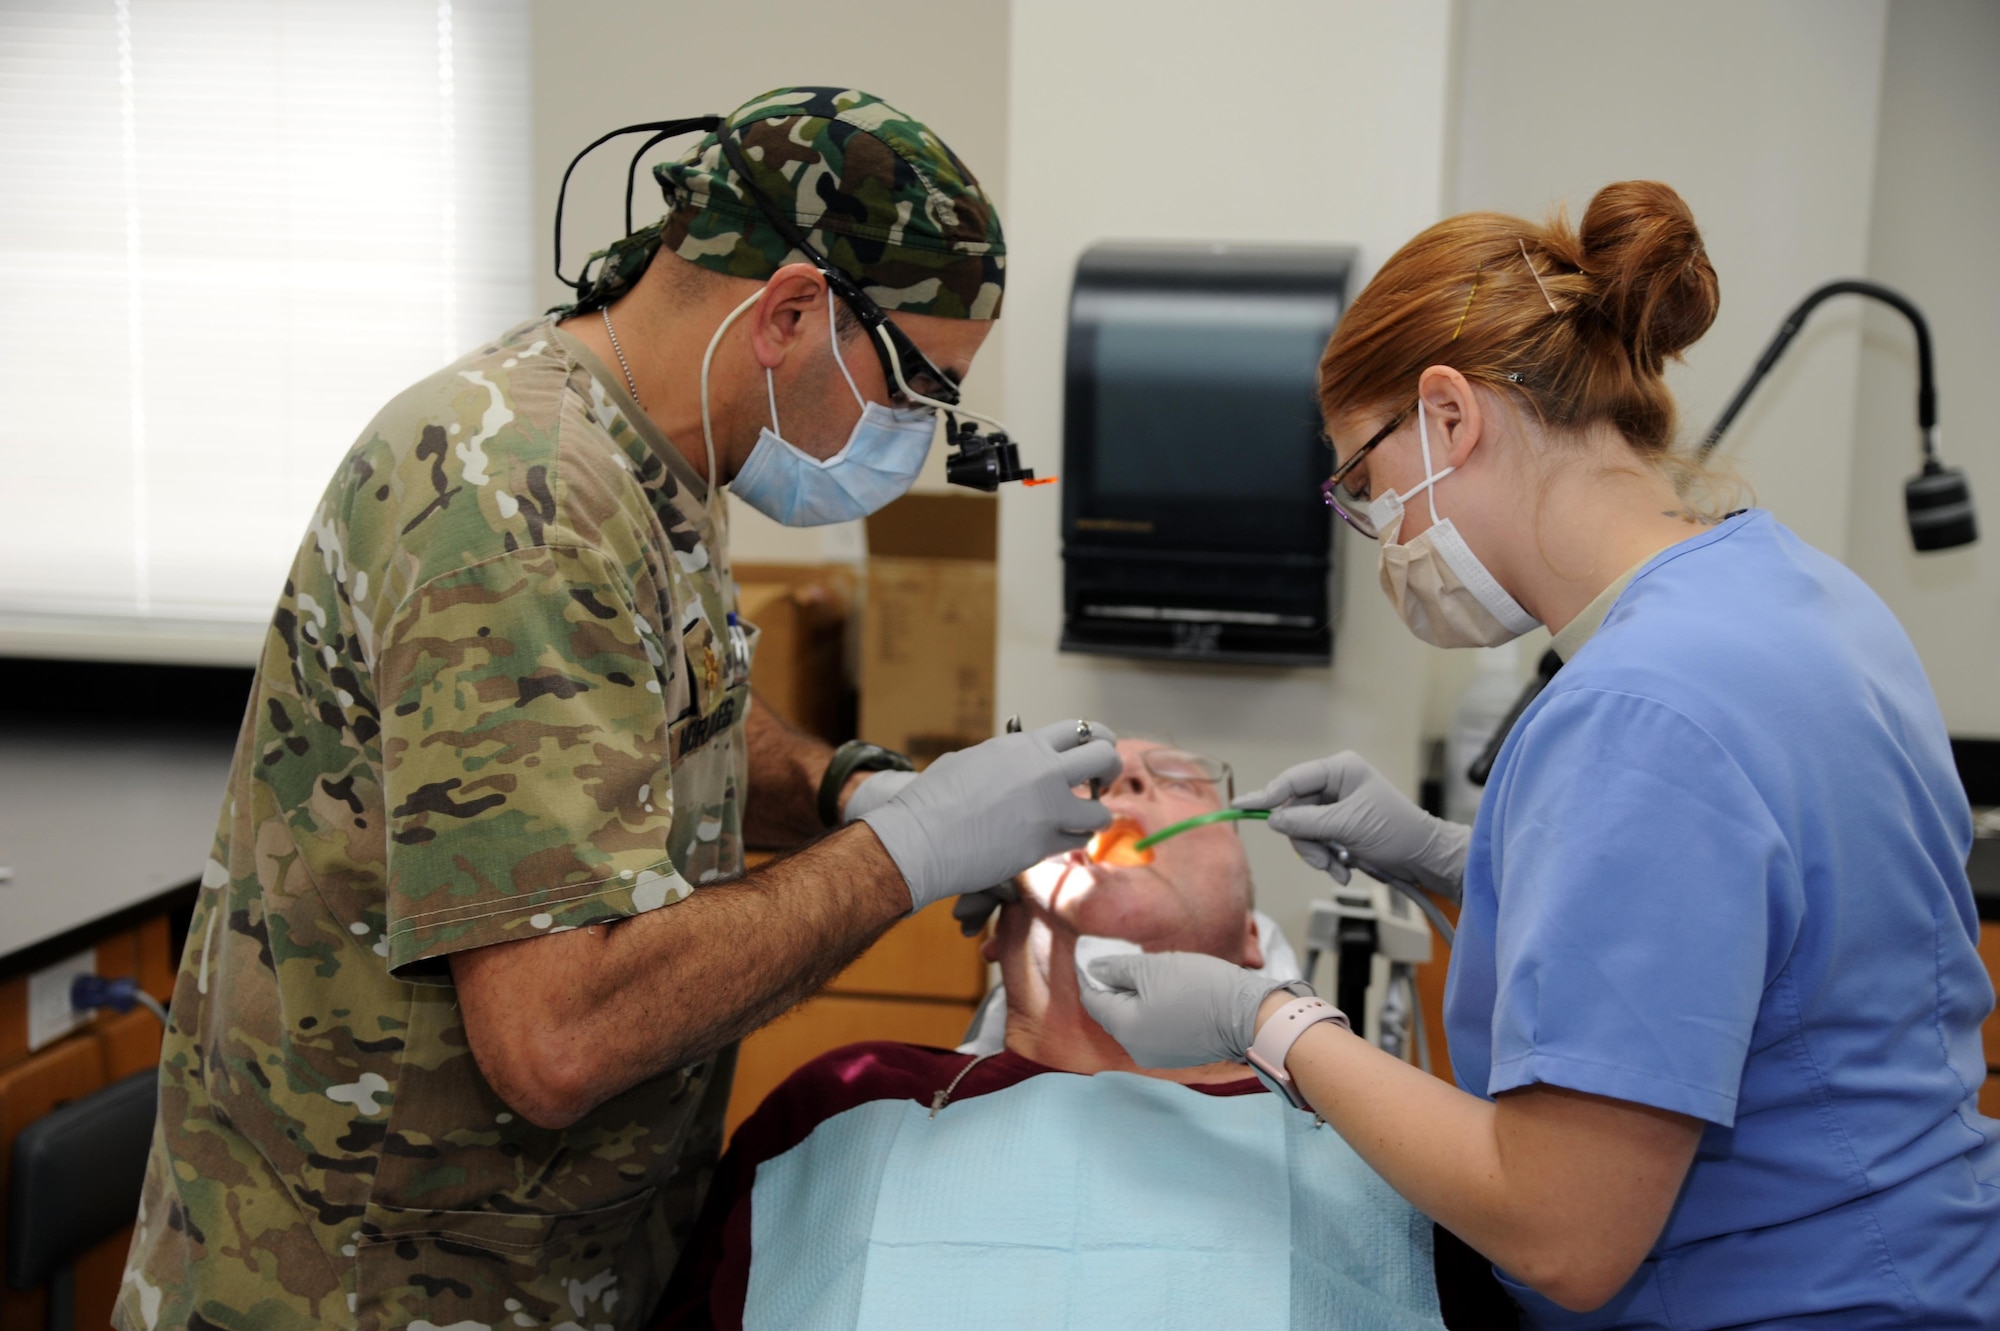 U.S. Army Maj. Jesus Morales, dentist, 49th Multifunctional Medical Battalion, Puerto Rico and U.S. Air Force Senior Airman Jessica Hawk, dental assistant, 172d Airlift Wing, Jackson Mississippi, extract a decayed tooth from Raymond Kline.  Kline participated in the no-cost medical services offered during the Ozark Highlands Innovated Readiness Training, Mountain Home, Arkansas, 5-12 June. (U.S. Air Force photo by Tech. Sgt. Peter Dean)  